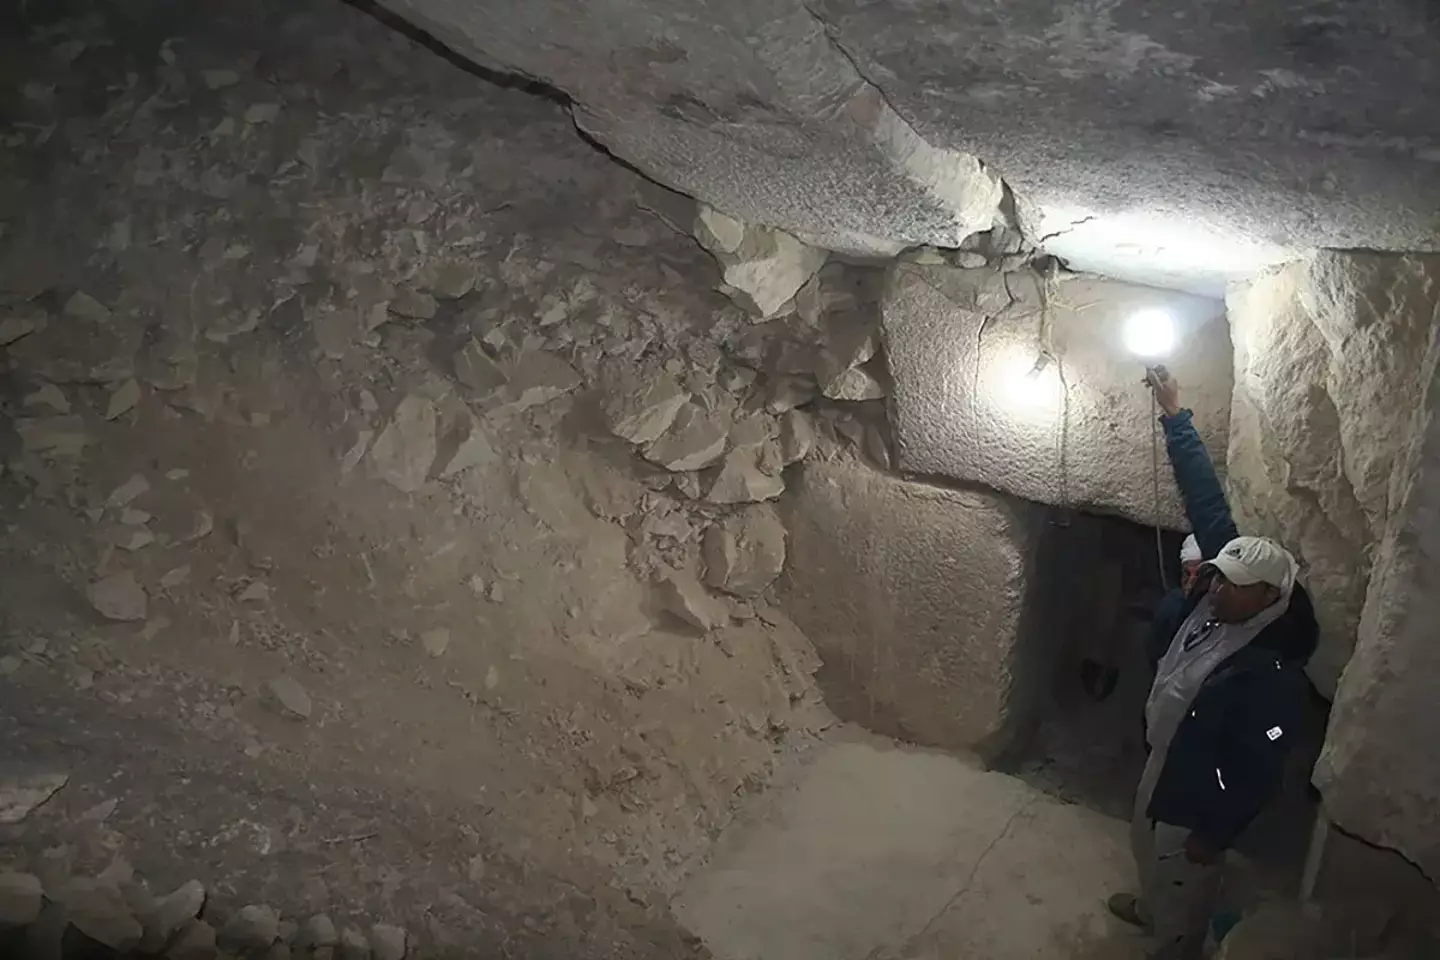 Experts discovered hidden chambers in the 4,400-year-old pyramid which they believe were storage rooms.